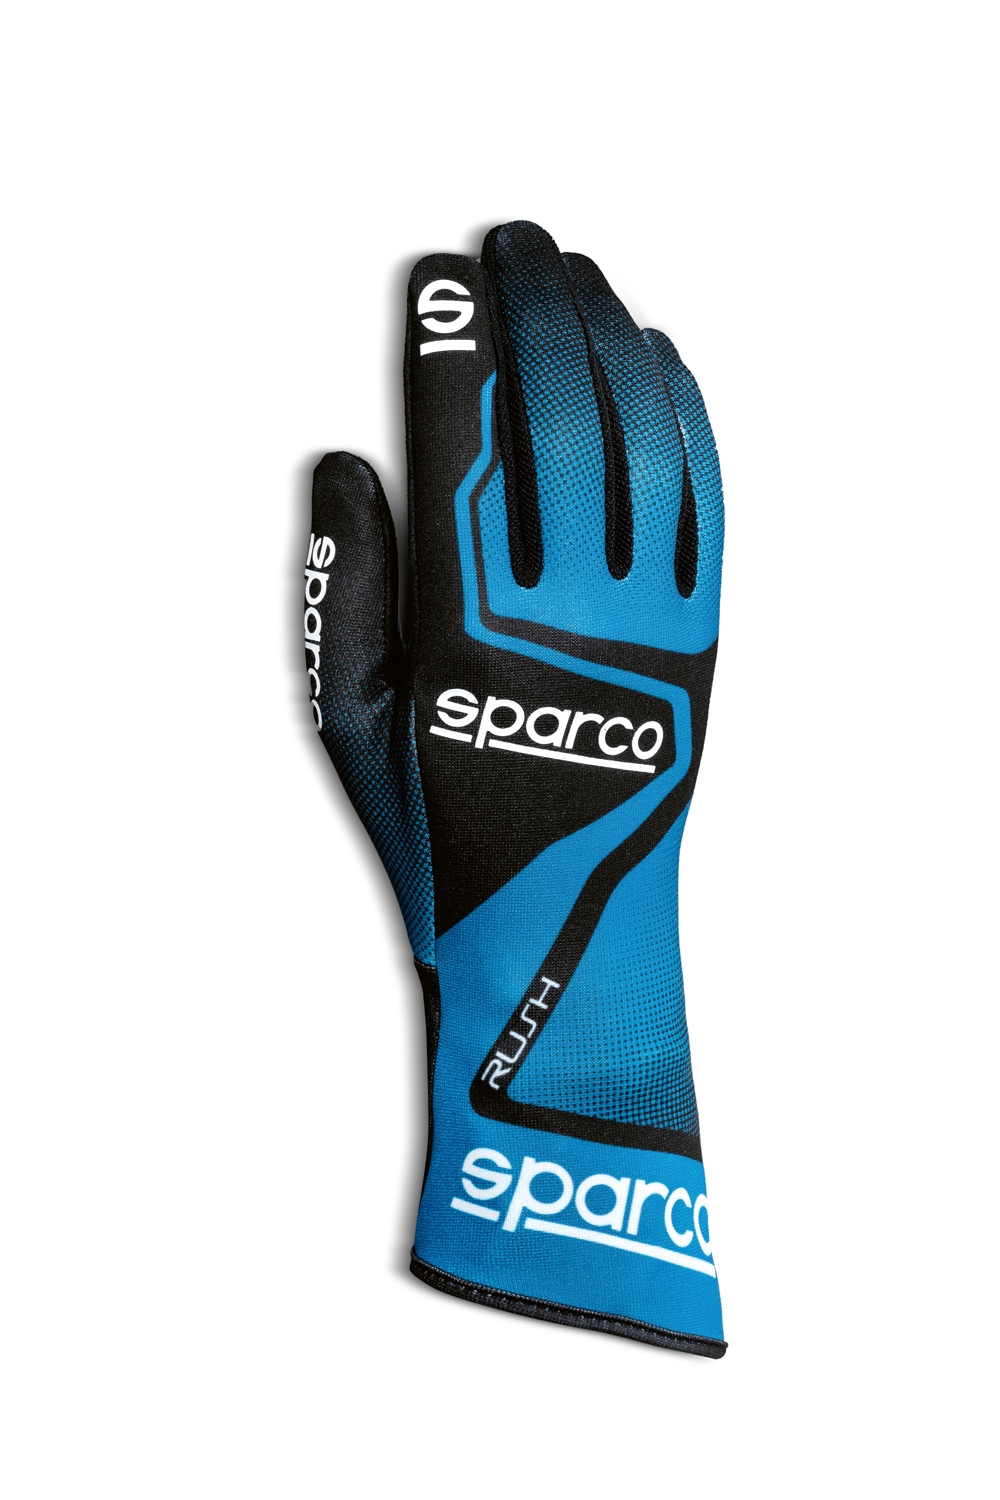 Karthandschuhe Rush Sparco Point Racing |